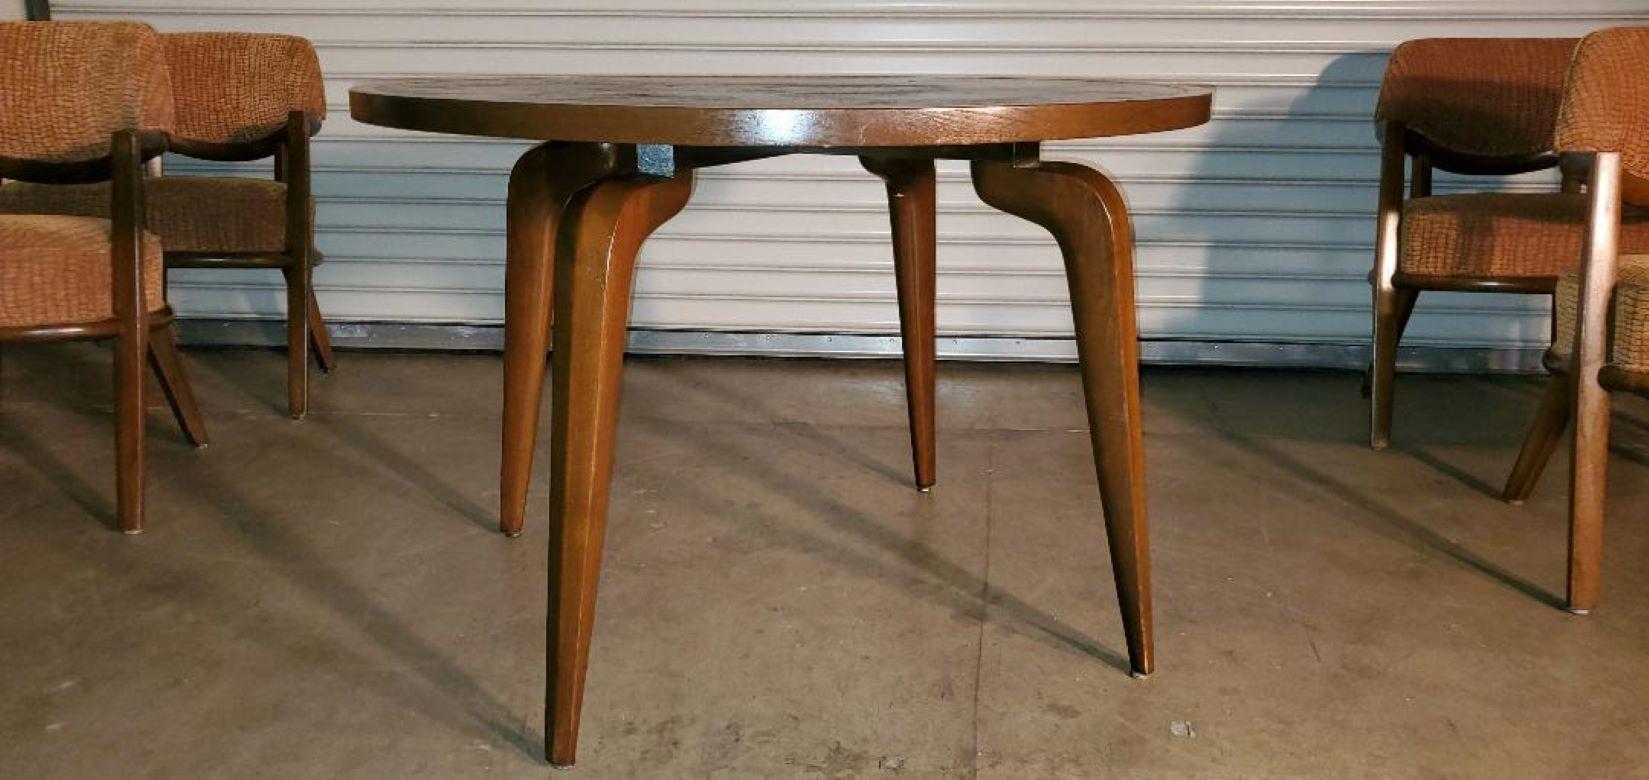 RARE 1950s Maurice Bailey Monteverdi Young Card Table & 4 Maurice Bailey Chairs For Sale 2